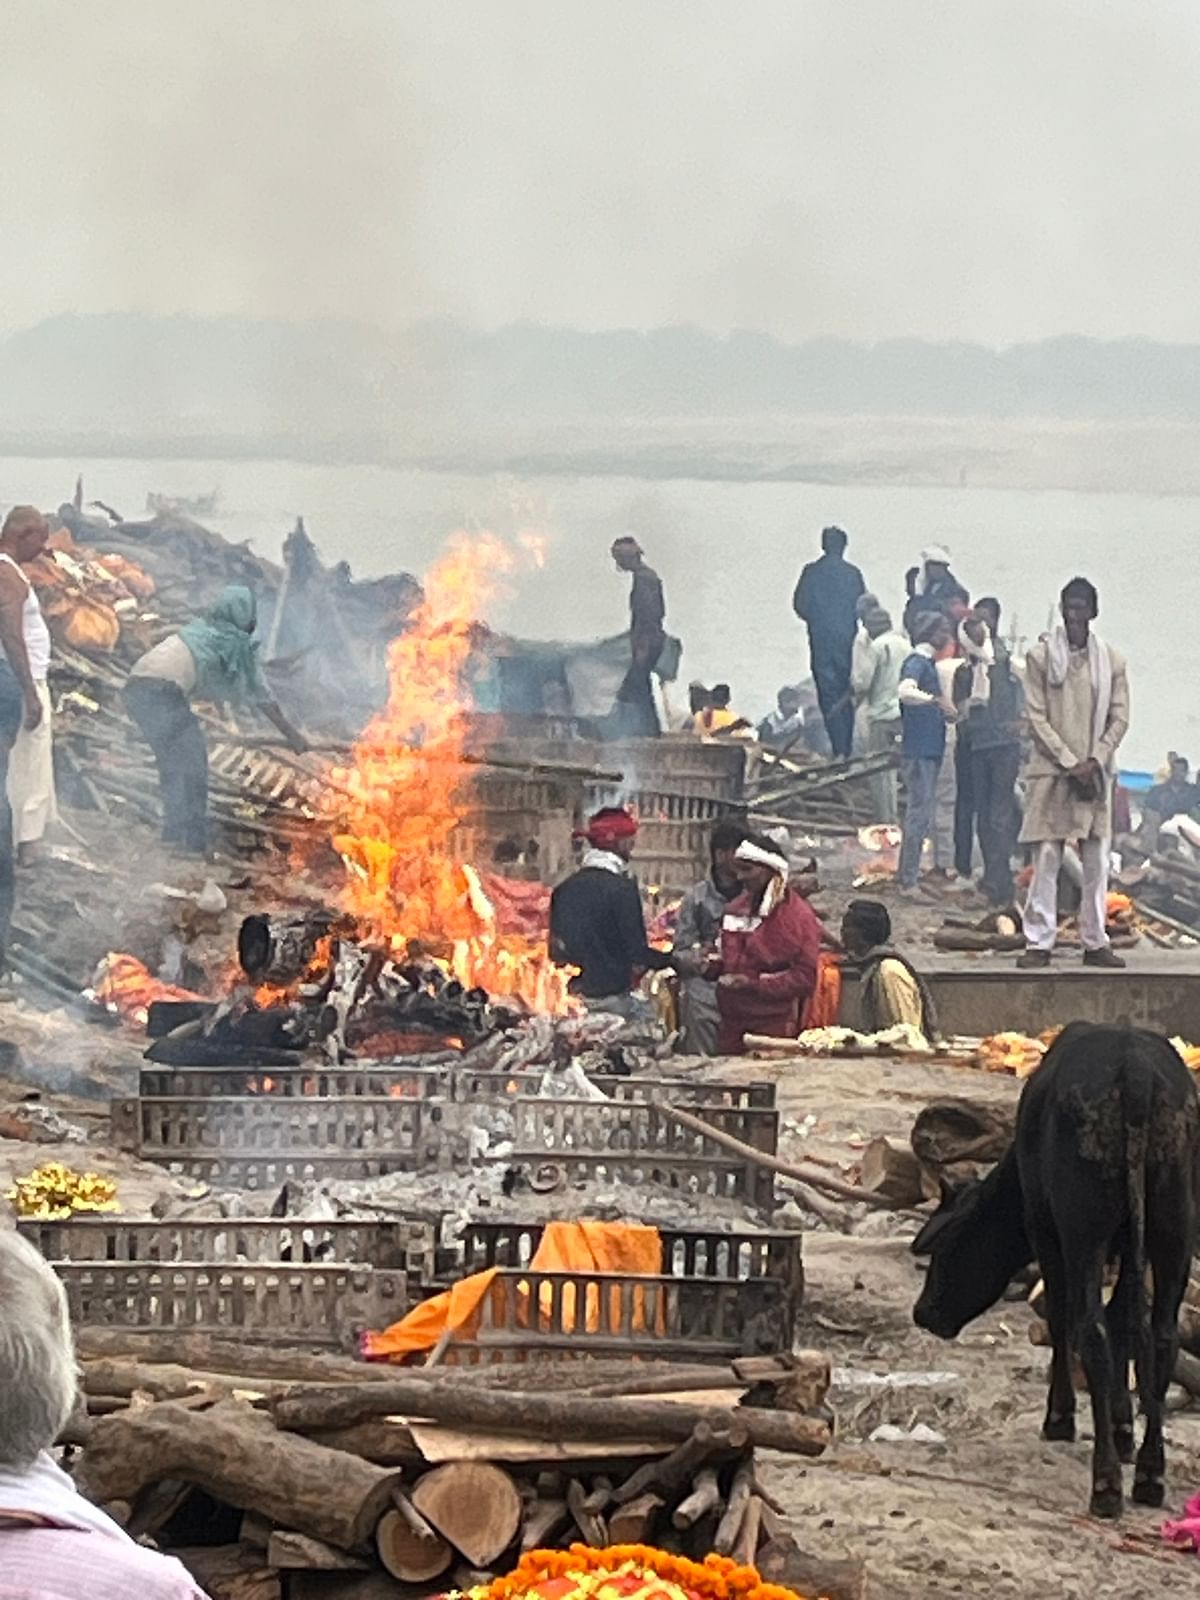 An estimated 100 bodies are cremated daily at Manikarnika, where a pyre burns 24 hours a day, 365 days a year. 